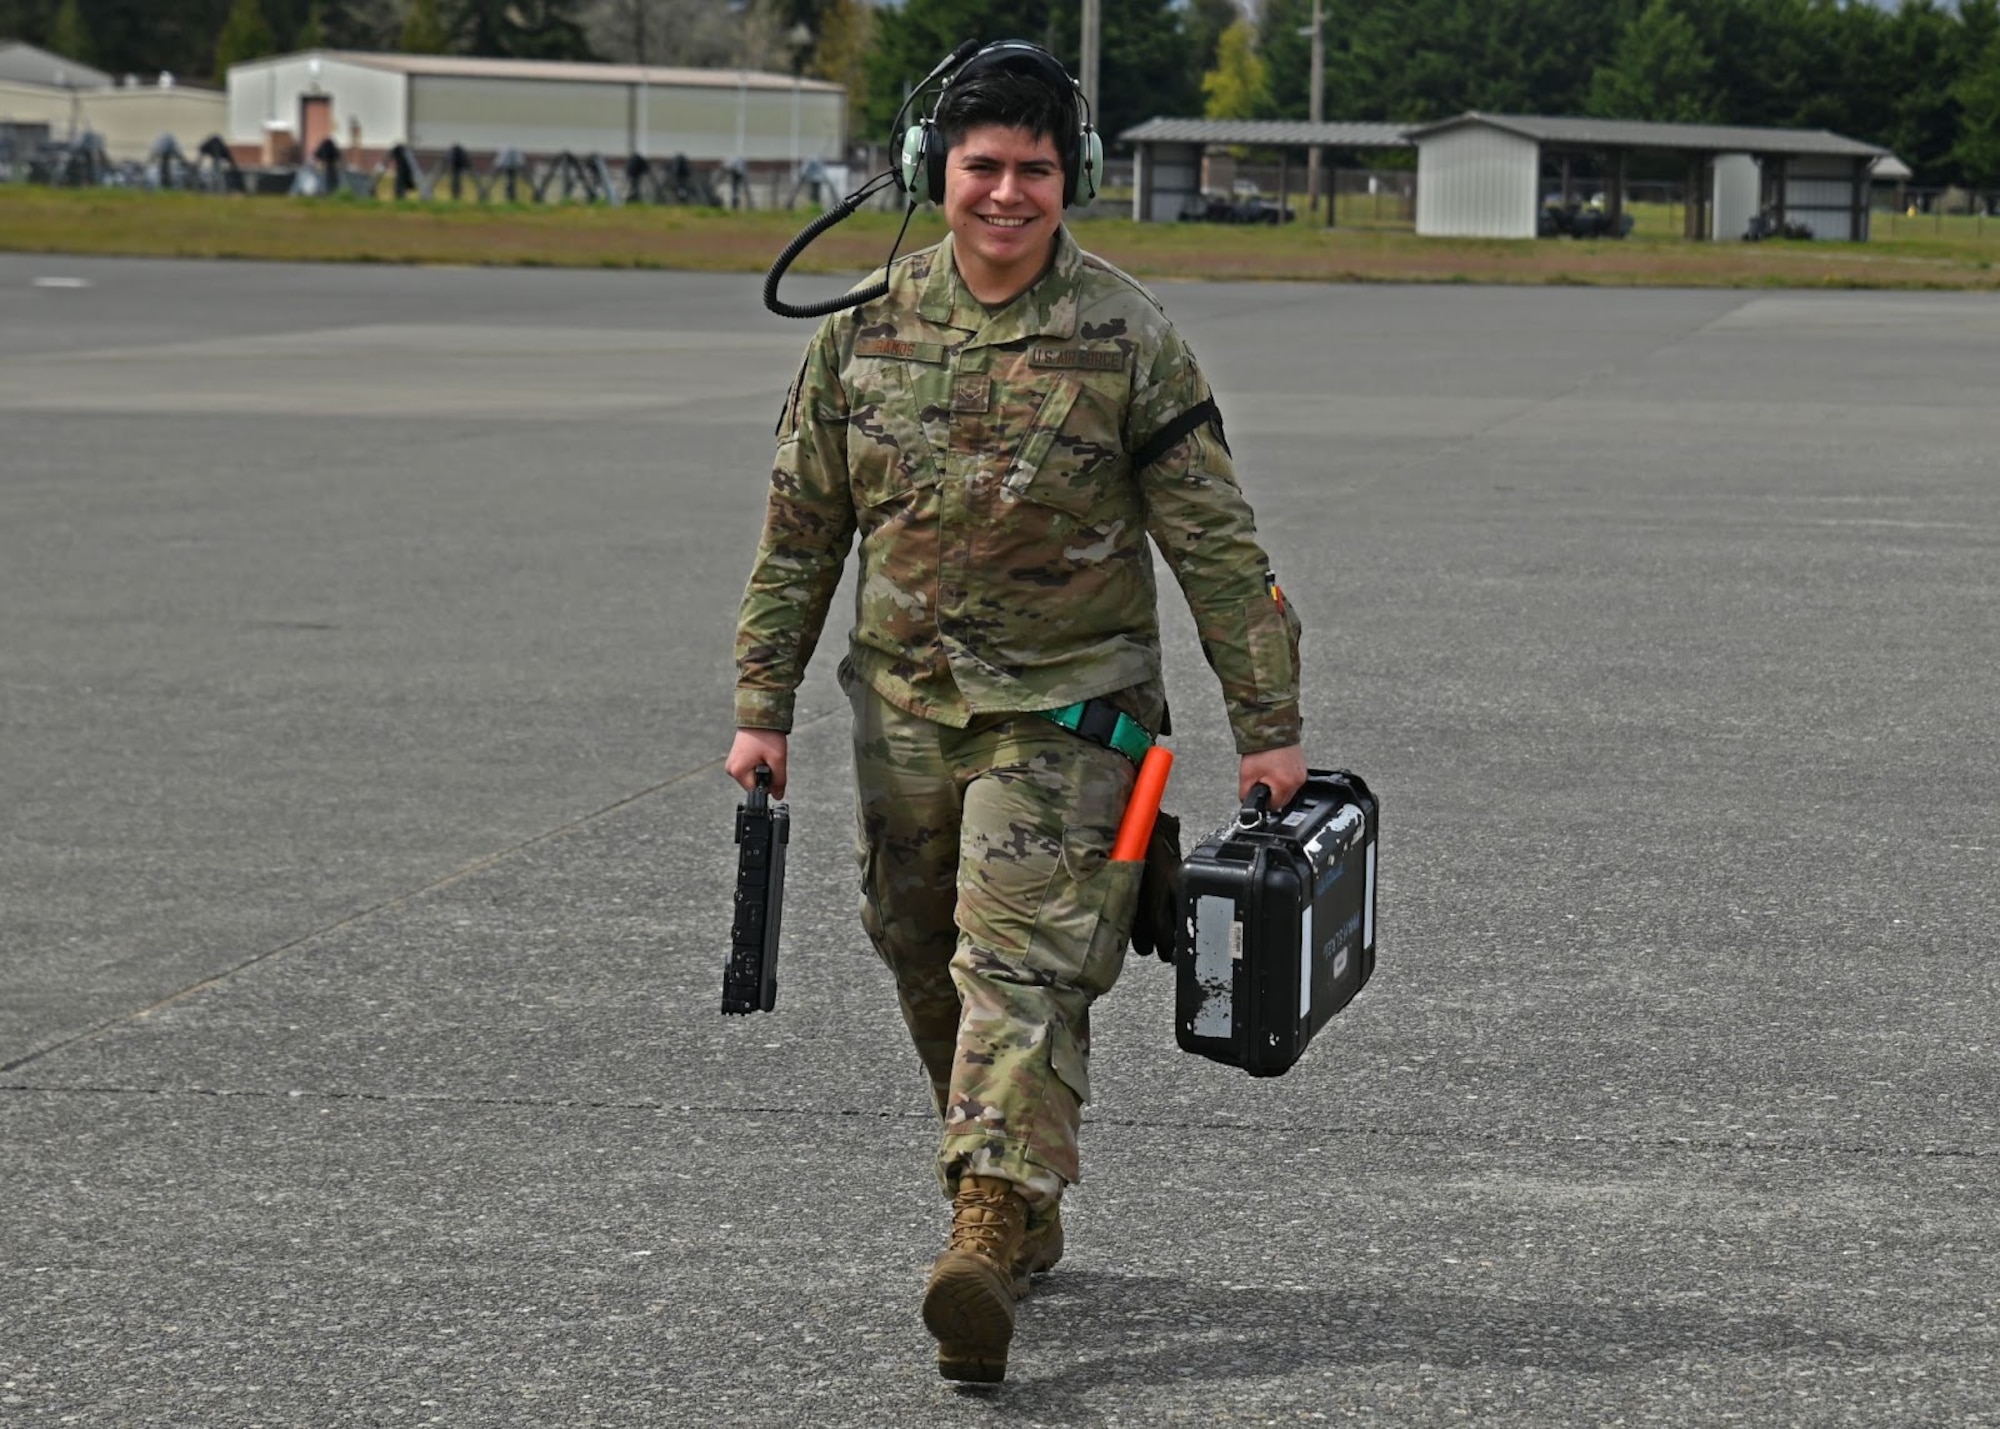 U.S. Air Force Airman 1st Class Carlos Ramos, crew chief with the 62nd Aircraft Maintenance Squadron, carries a launch kit and computer used during Agile Combat Employment training at Joint Base Lewis-McChord, Washington, April 21, 2022. The week-long ACE training reinforces the team dynamic required for maintenance Airmen to operate effectively in limited support locations while continuing to maintain mission effectiveness. (U.S. Air Force photo by Airman 1st Class Callie Norton)